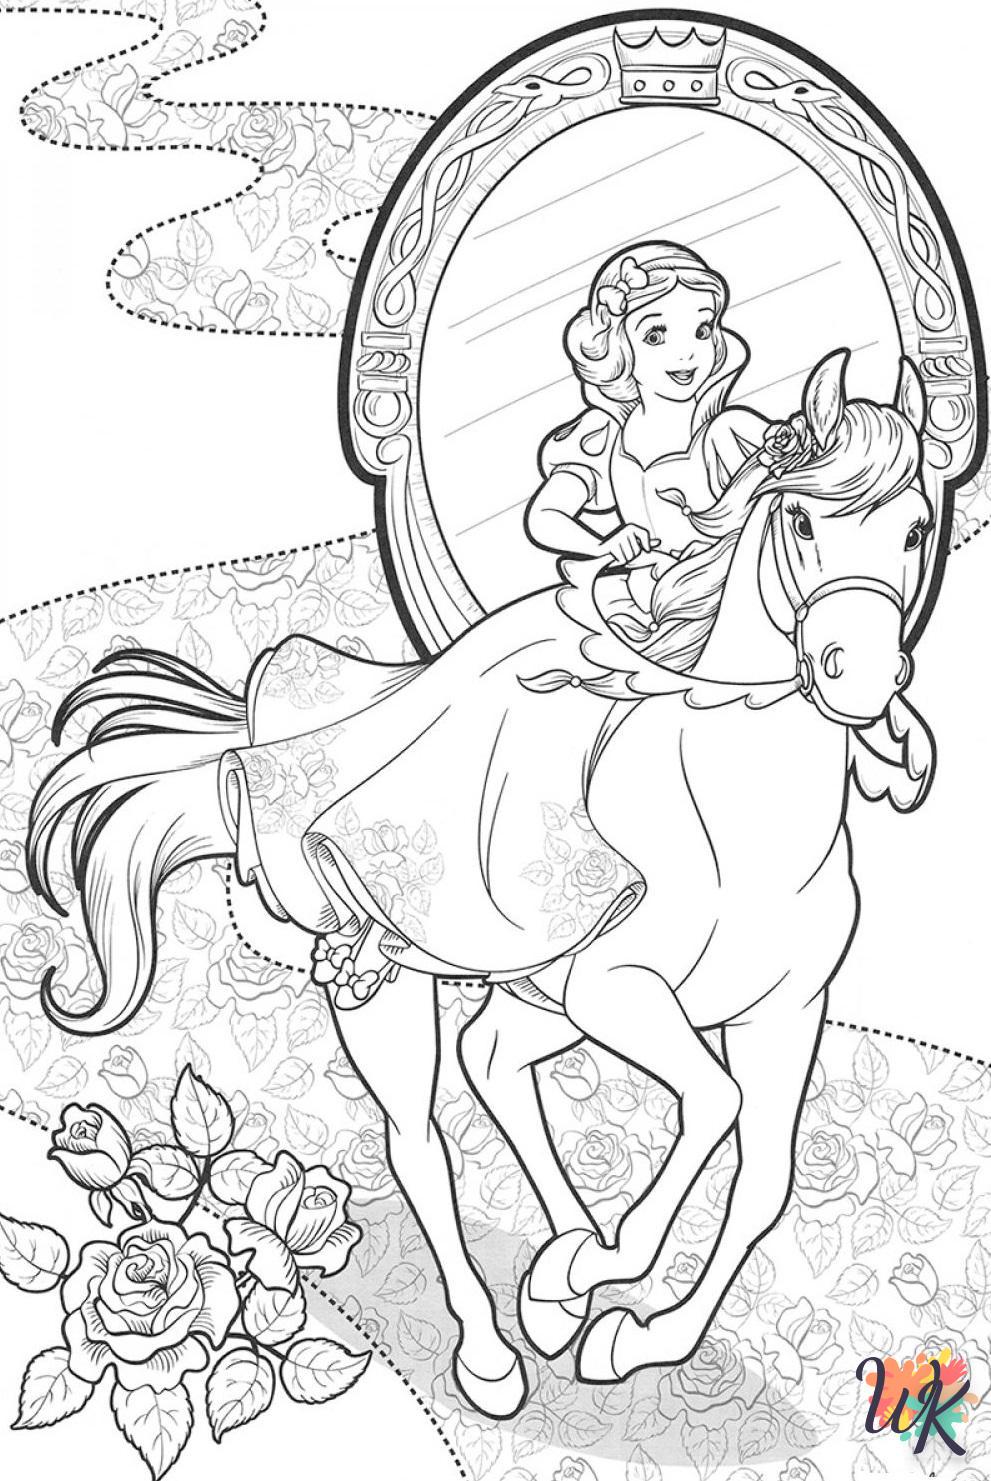 old-fashioned Snow White coloring pages